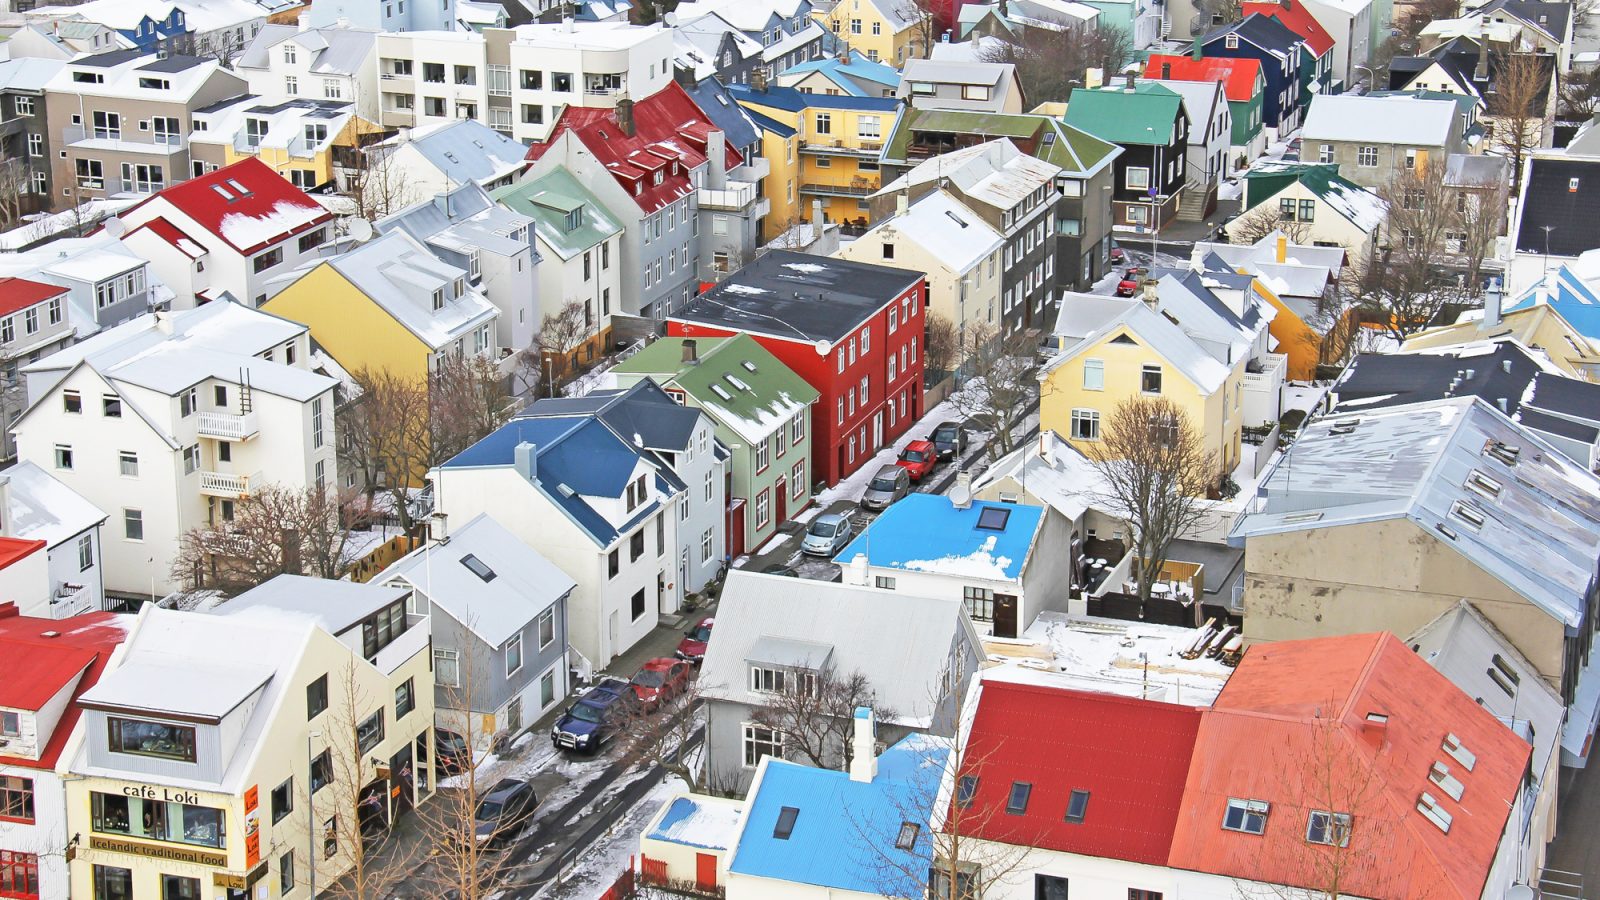 Get to know Iceland | Reykjavik | Where to stay in Iceland, what to pack for Iceland, and what you need to know about Iceland | #timebudgettravel #traveltips #Iceland #reykjavik #bluelagoon